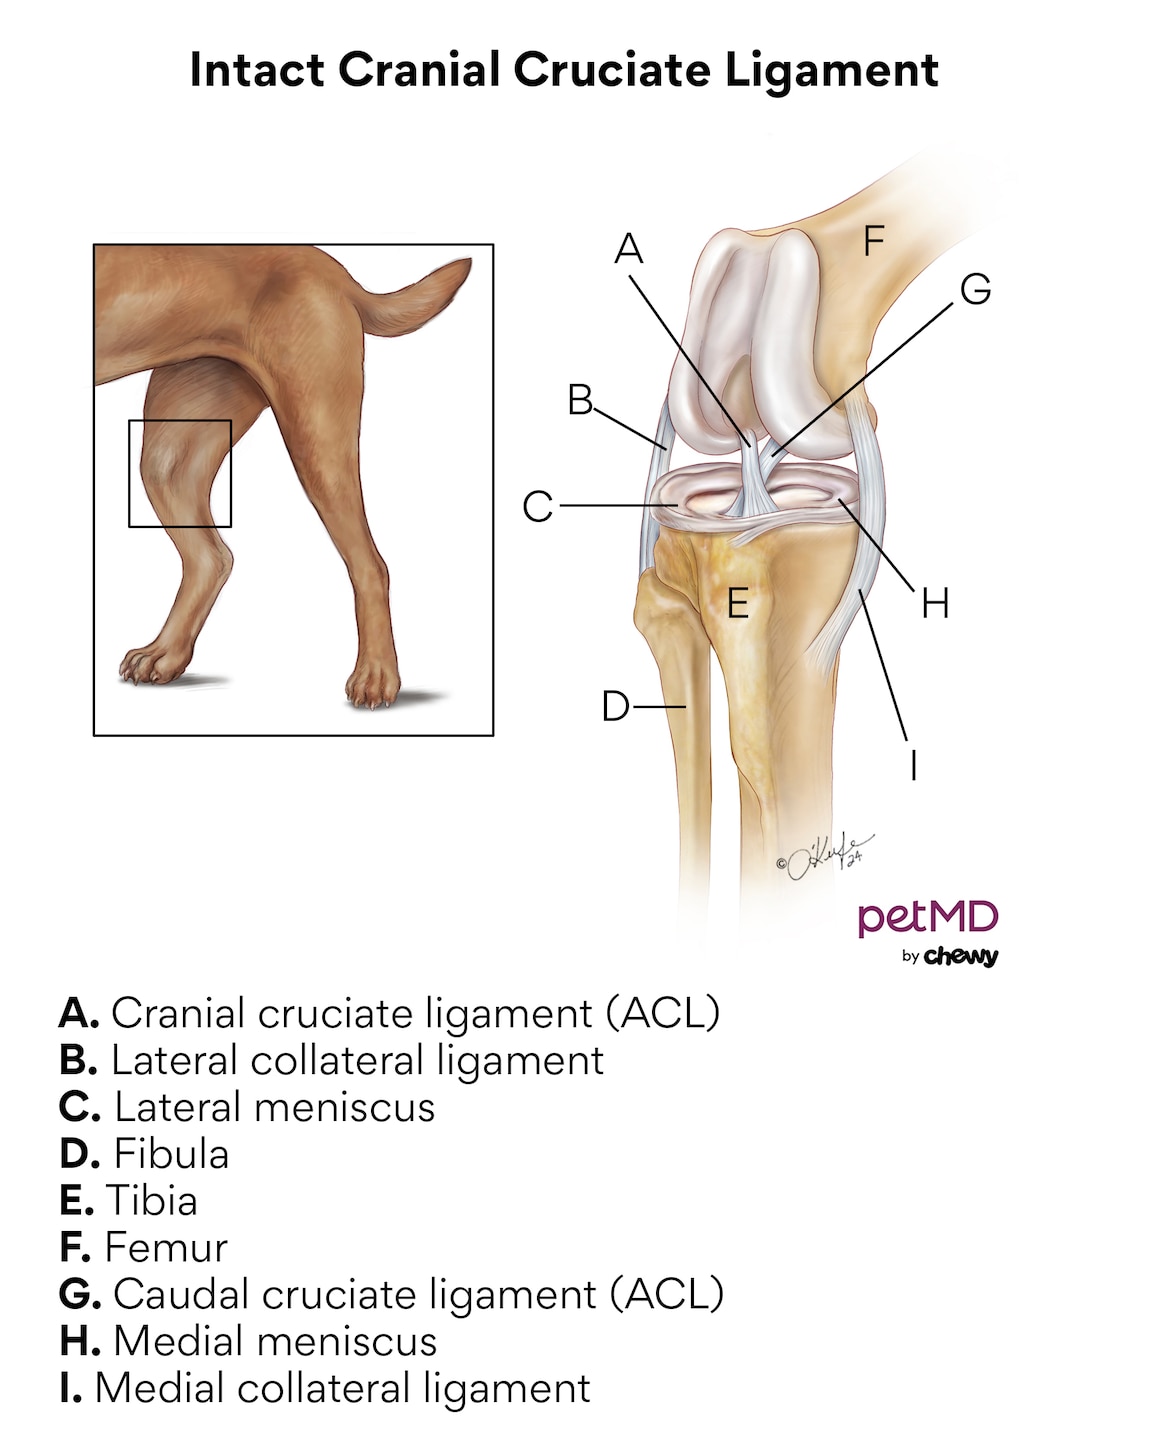 A diagram of an intact ACL in dogs.